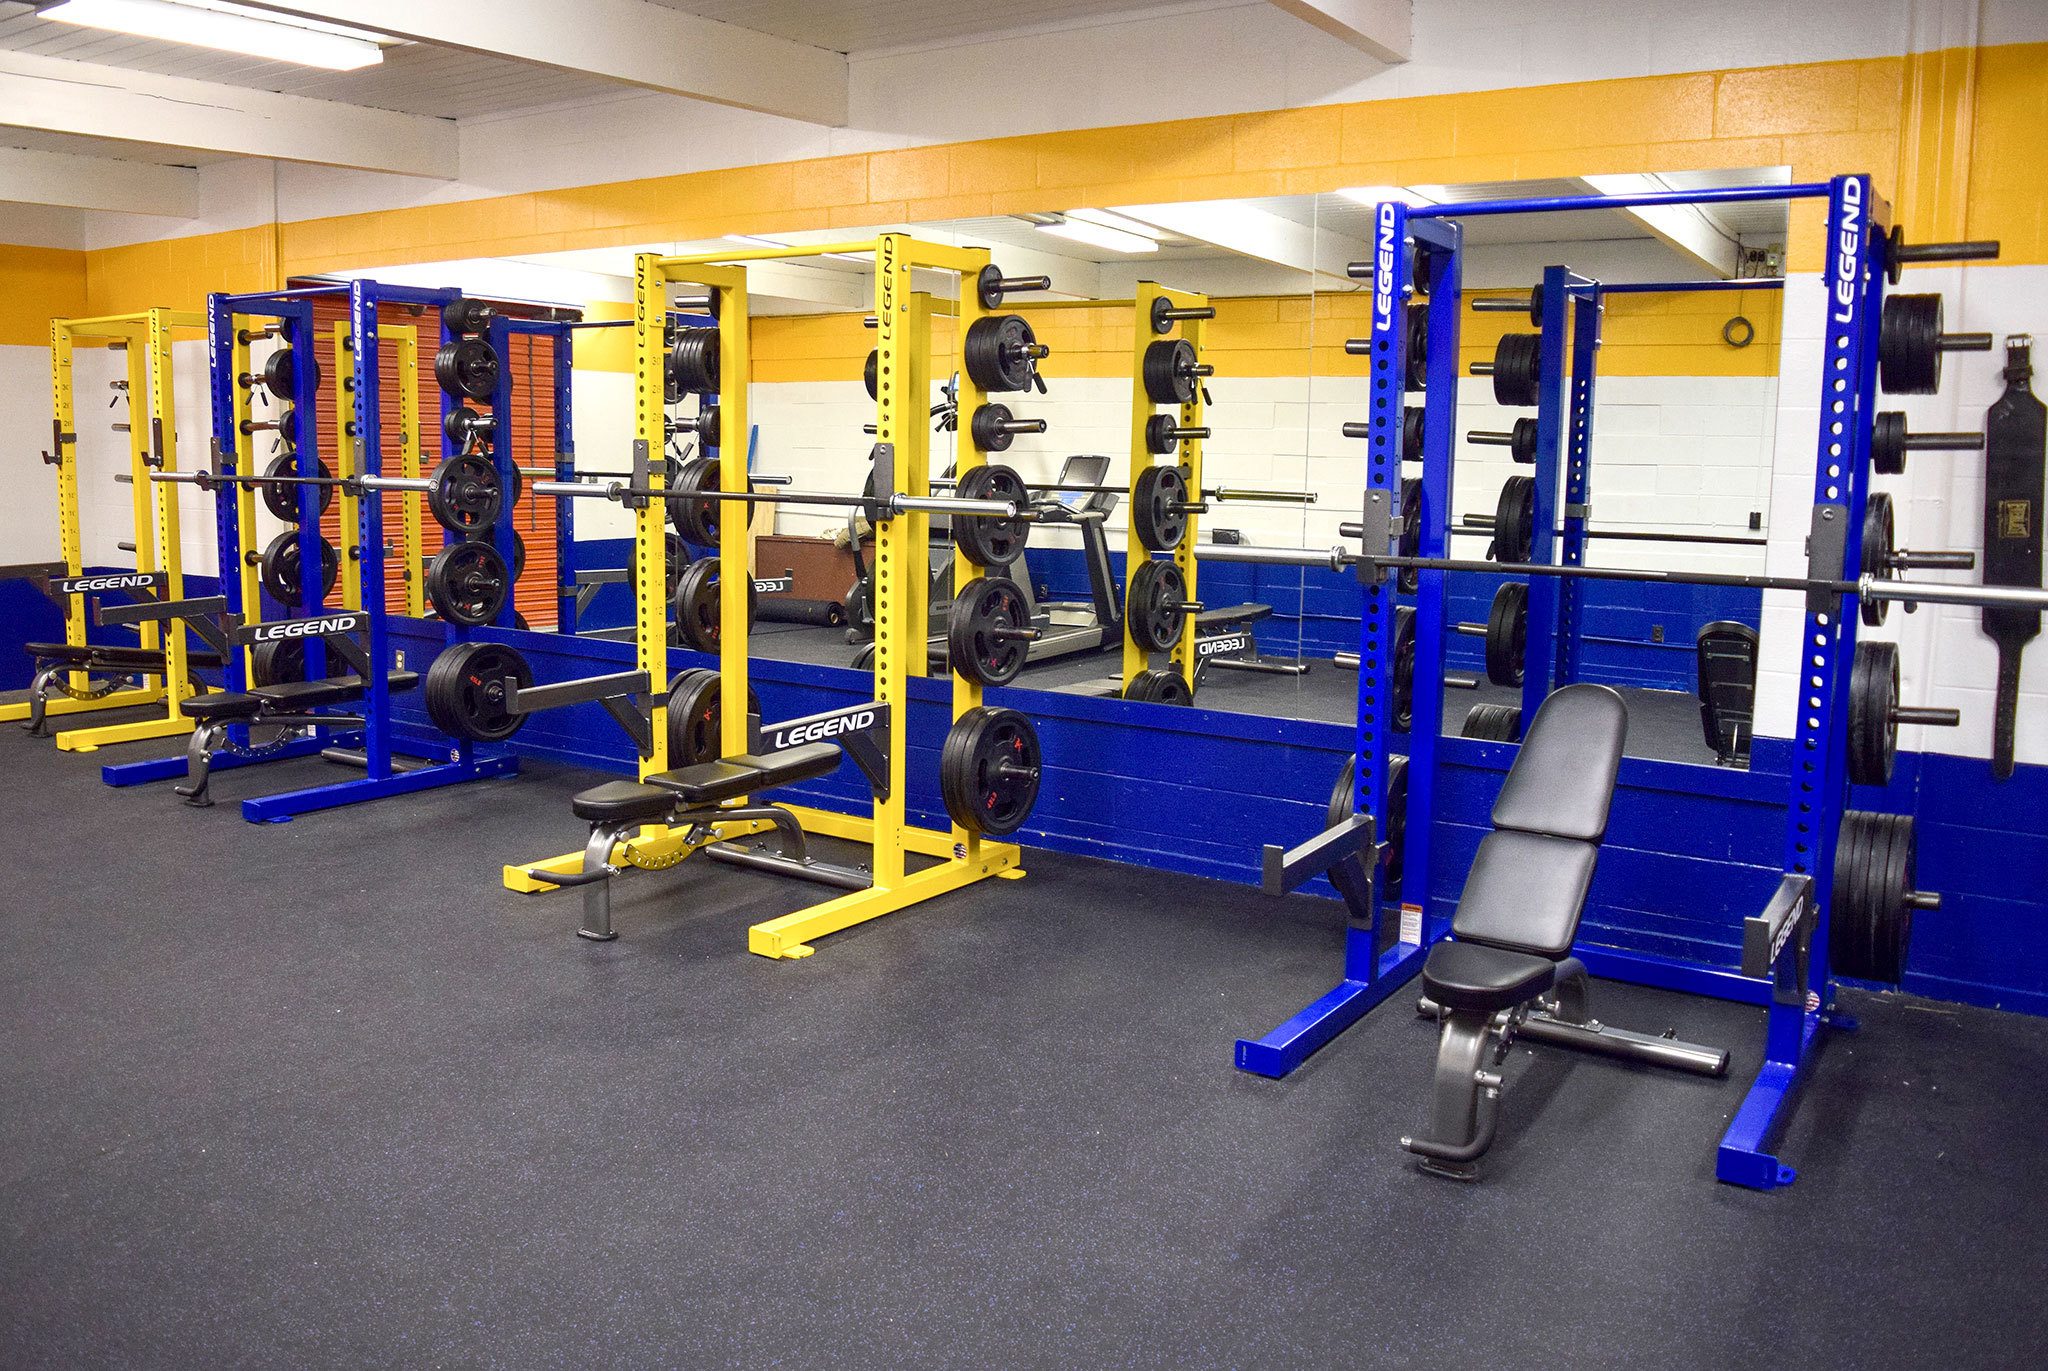 The new and improved weight room at Crescent School is painted in the Loggers’ school colors of blue and gold. The project was spearheaded by Tommy Farris.